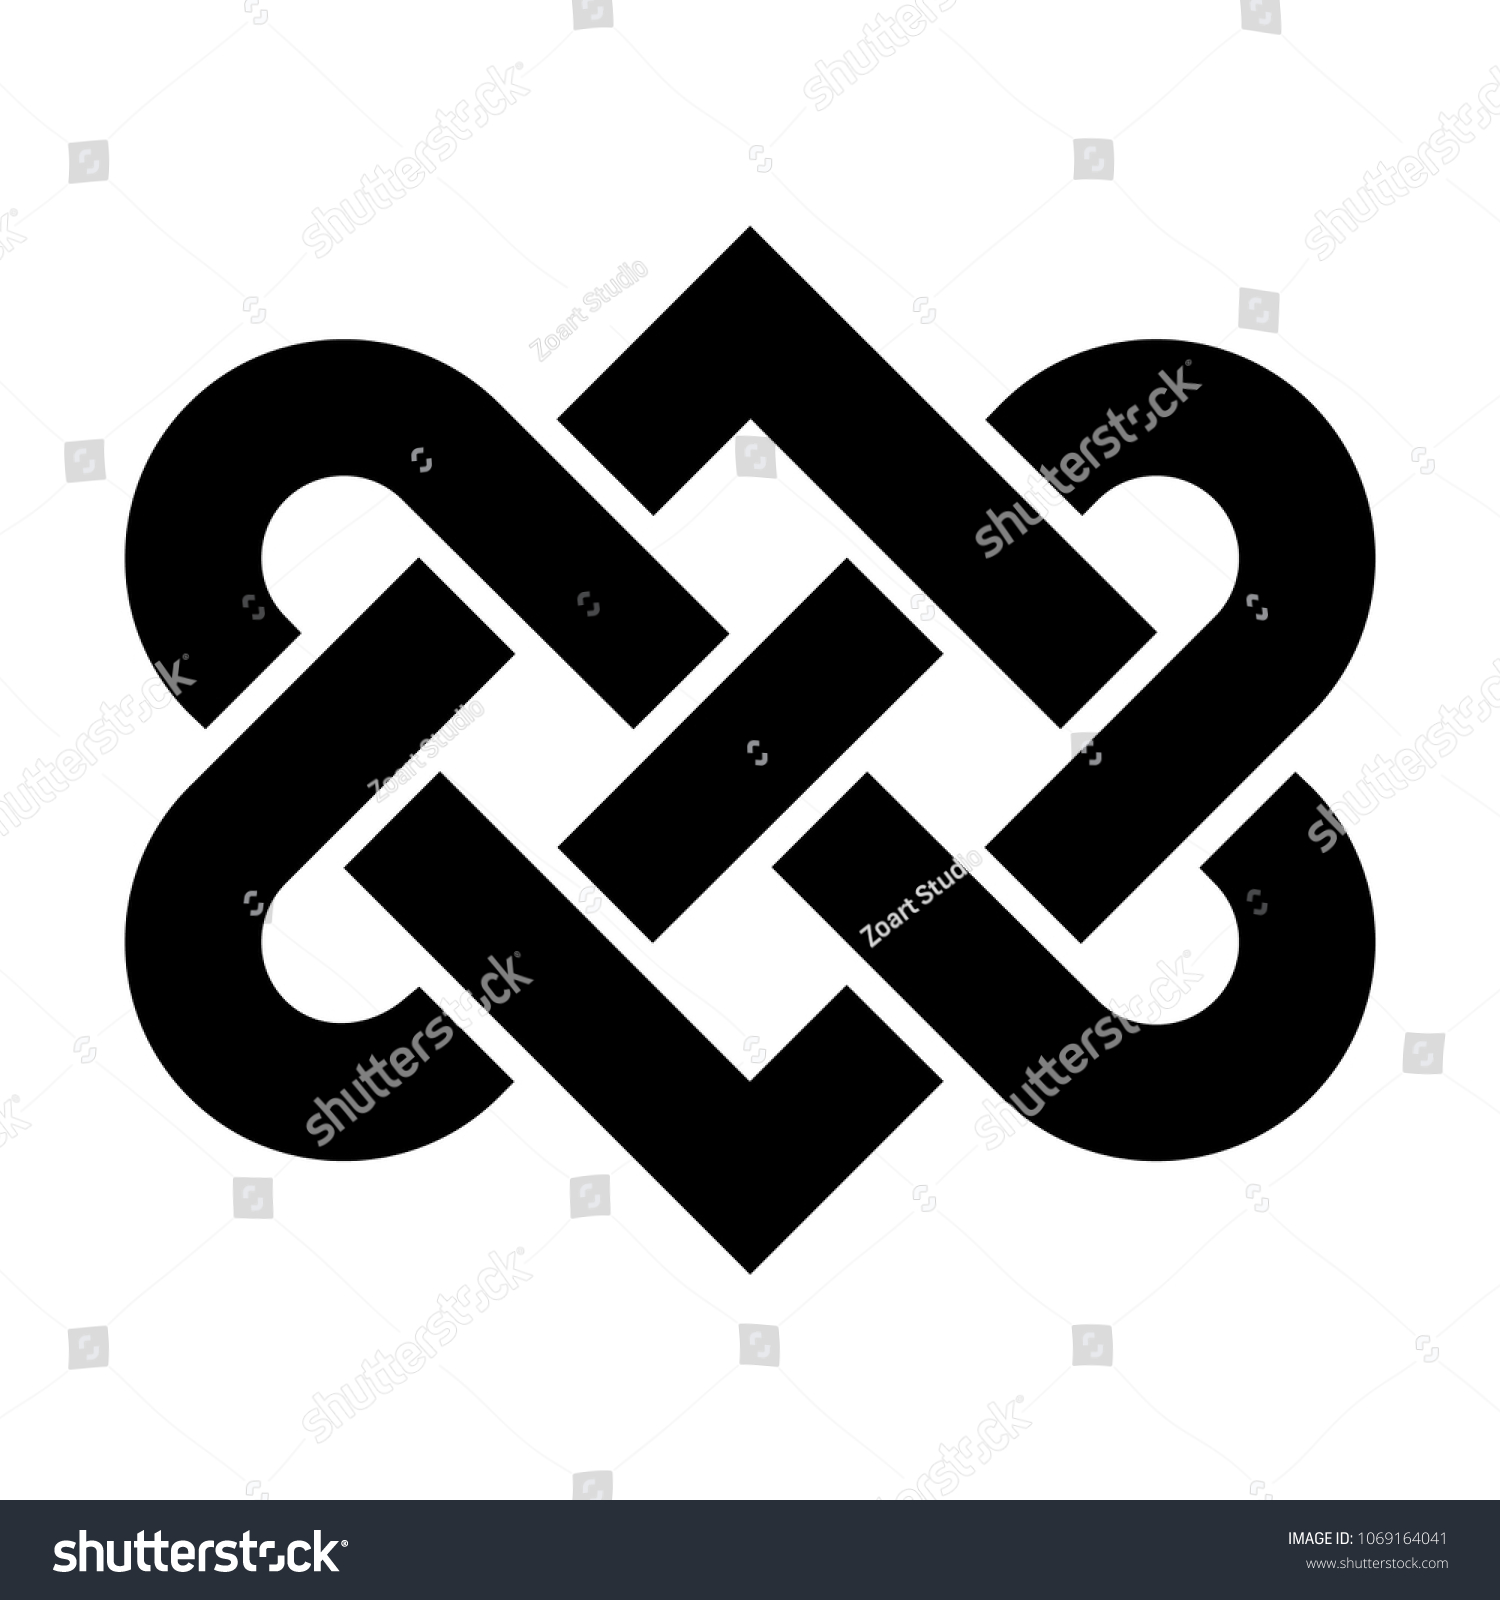 Download Celtic Love Knot Vector Stock Vector (Royalty Free) 1069164041 - Shutterstock